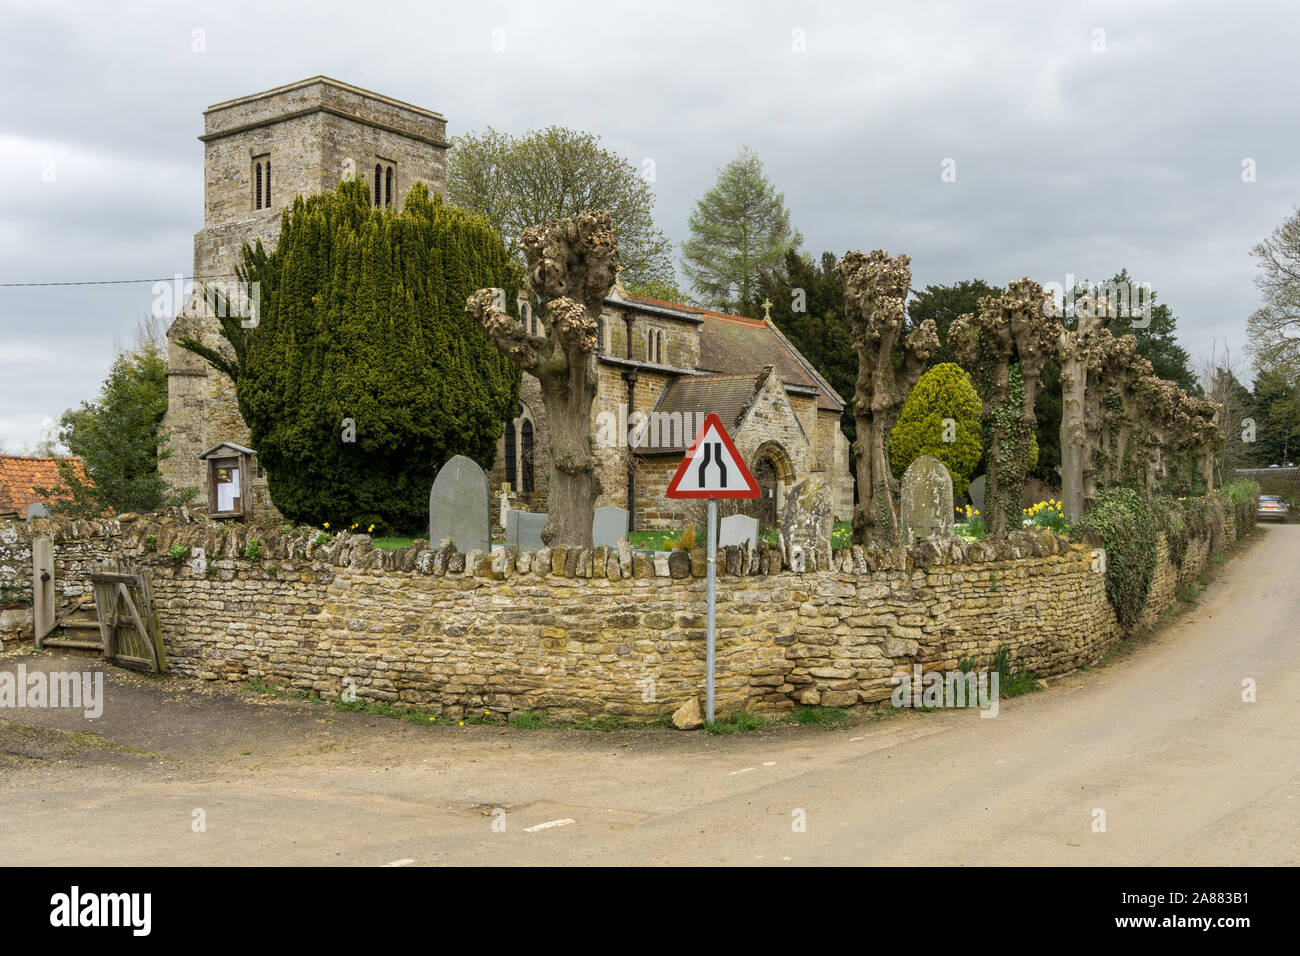 Parish church of St Catherine in the village of Draughton, Northamptonshire, UK; earliest parts date from the late 12th century. Stock Photo